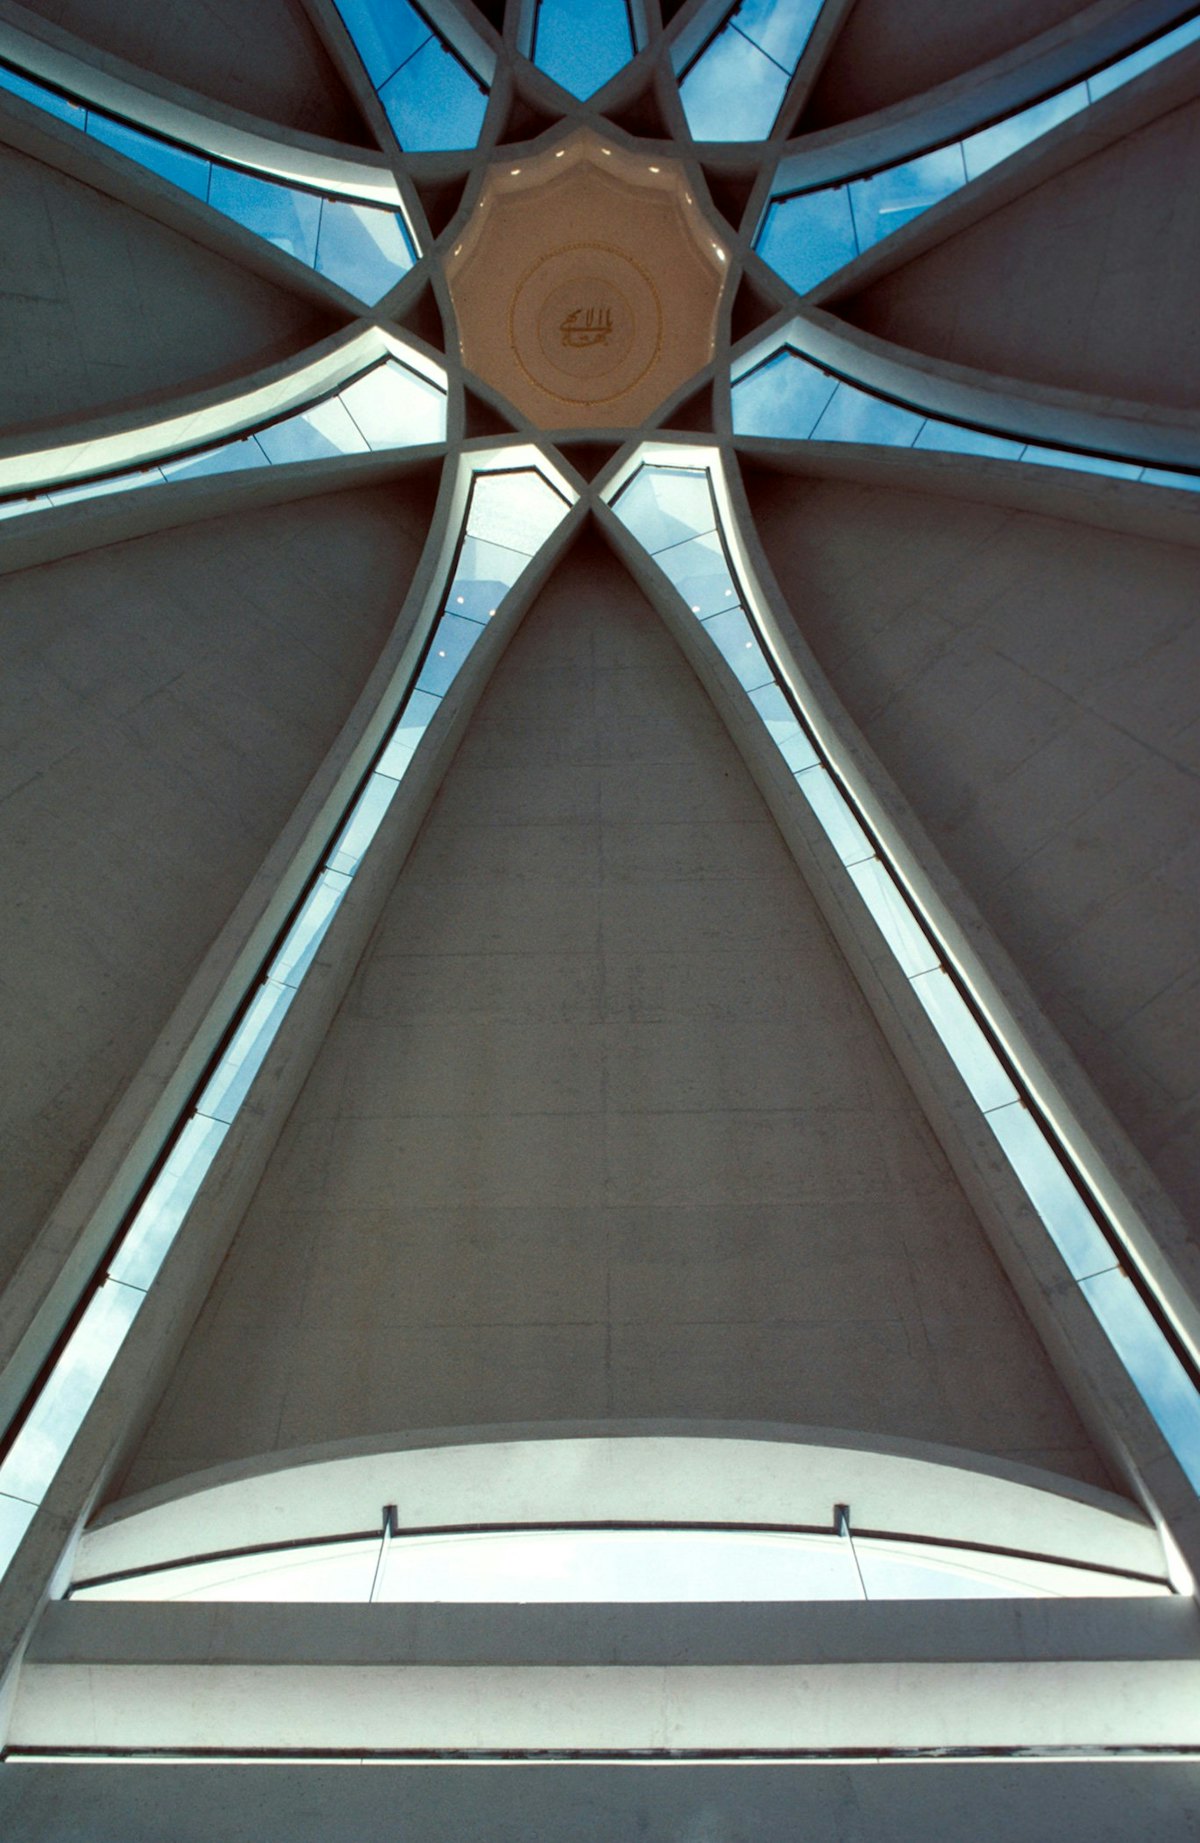 The interior of the dome of the Baha'i House of Worship in Samoa. Photo by Mark Wilkie.